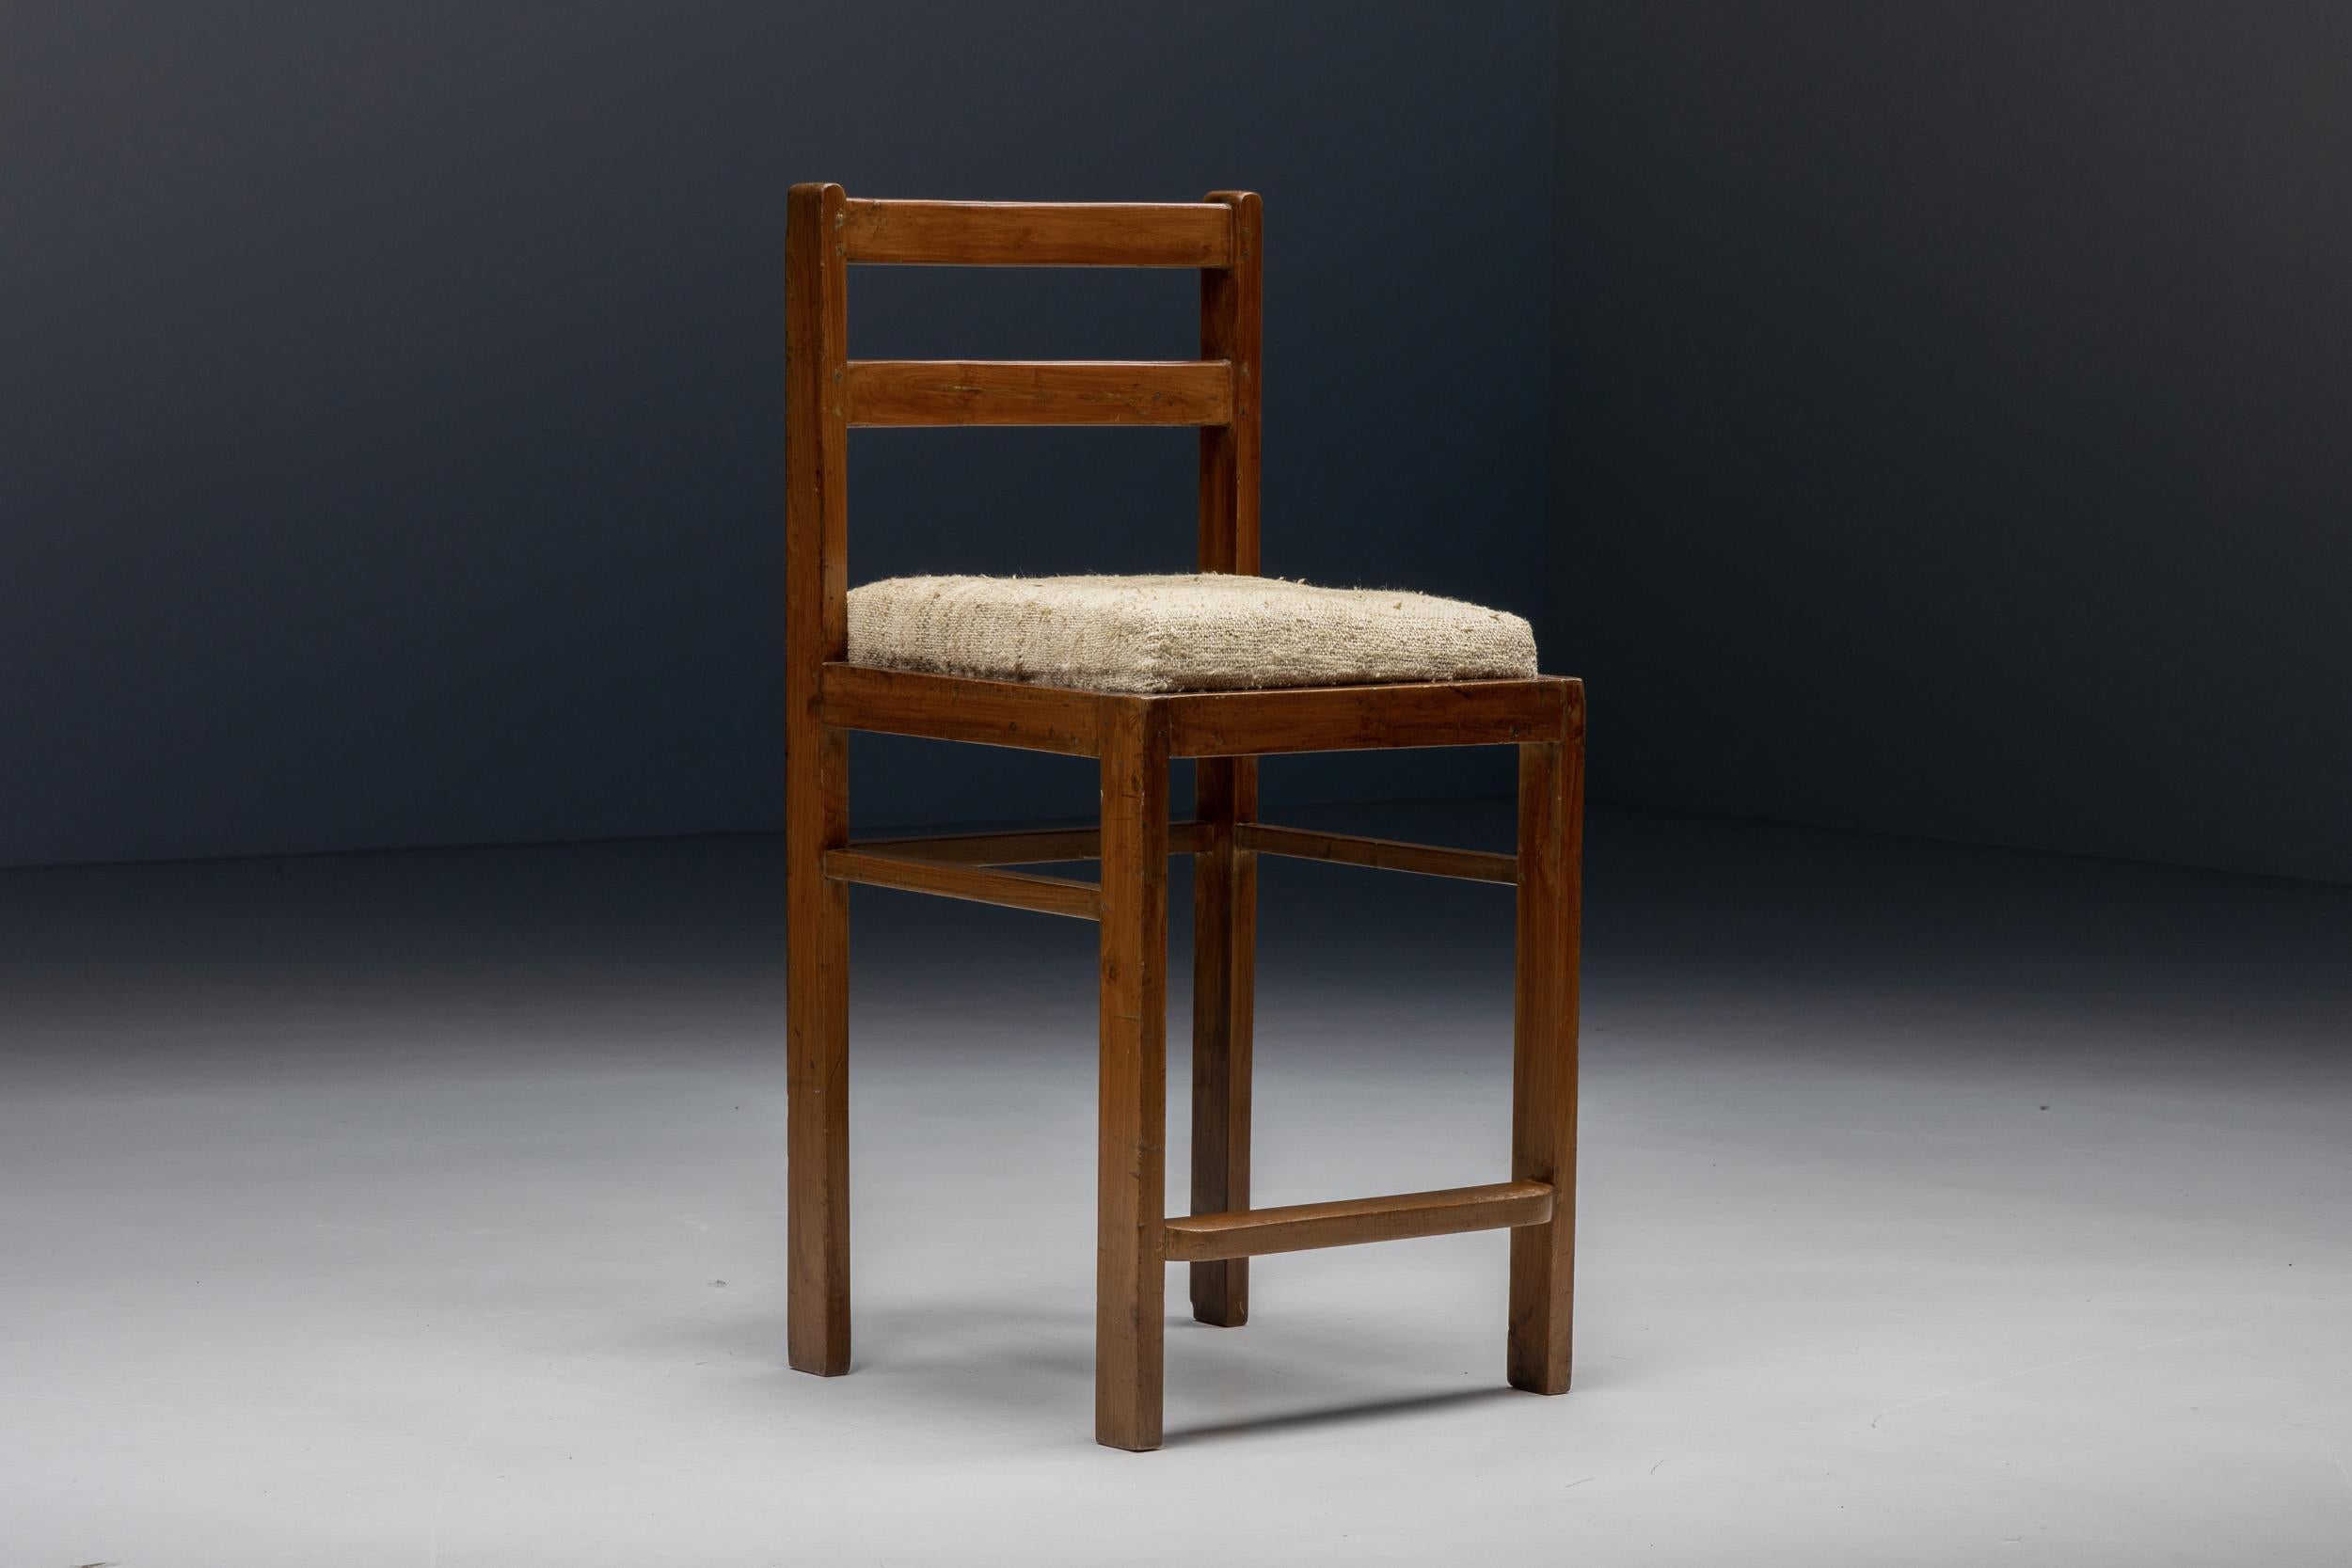 Mid-Century Modern Pierre Jeanneret Chandigarh Prototype Stool, Woven Linen Seating, India, 1960's For Sale